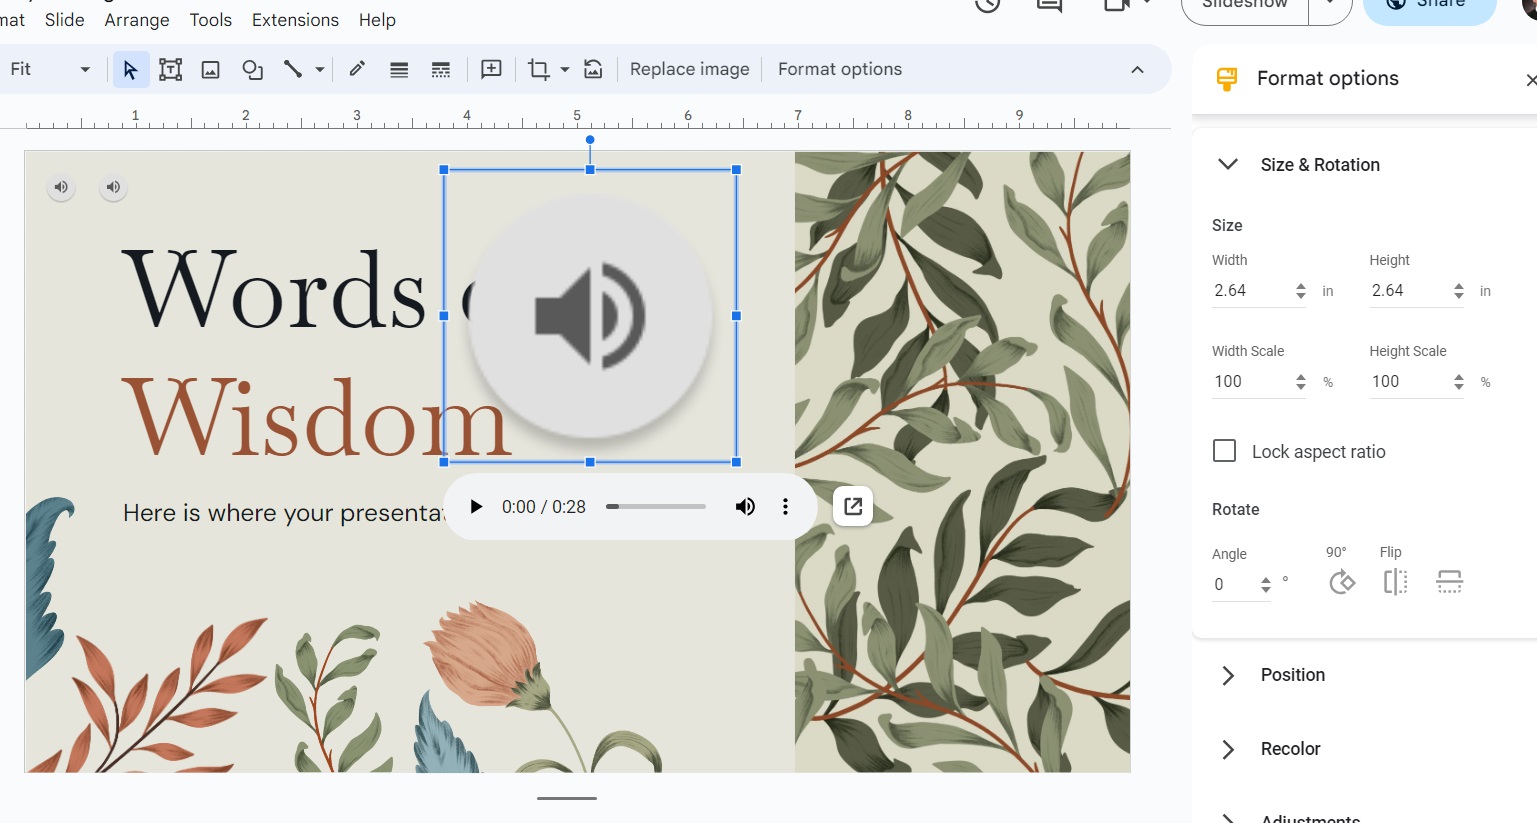 Formating options of audio icon in Google Slides